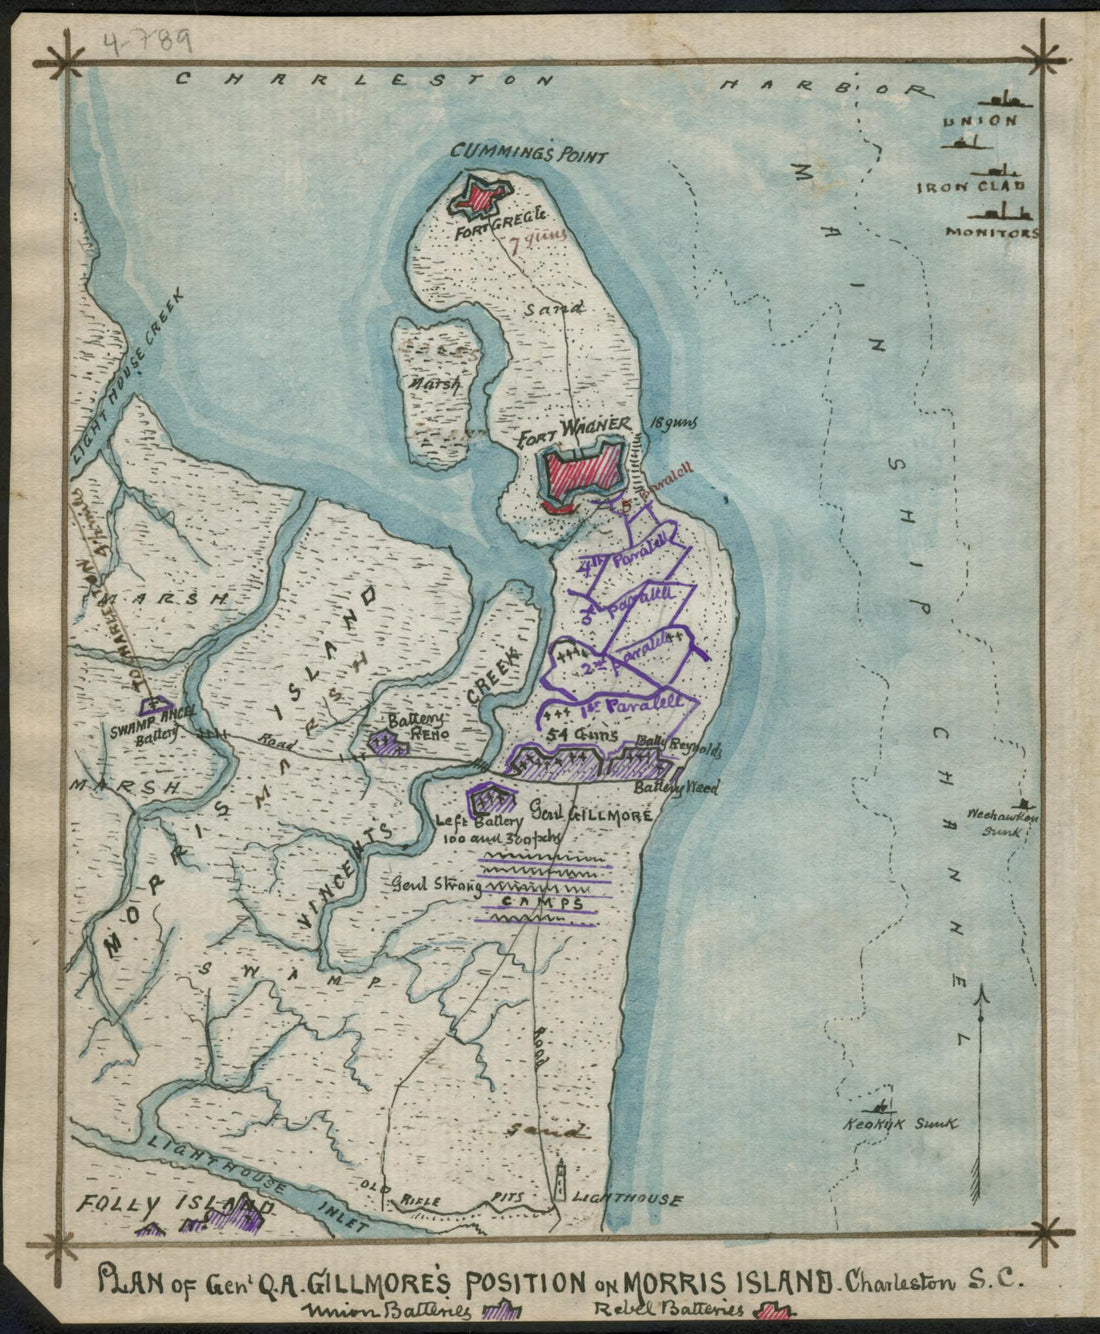 This old map of Plan of Genl Q. A. Gillmore&